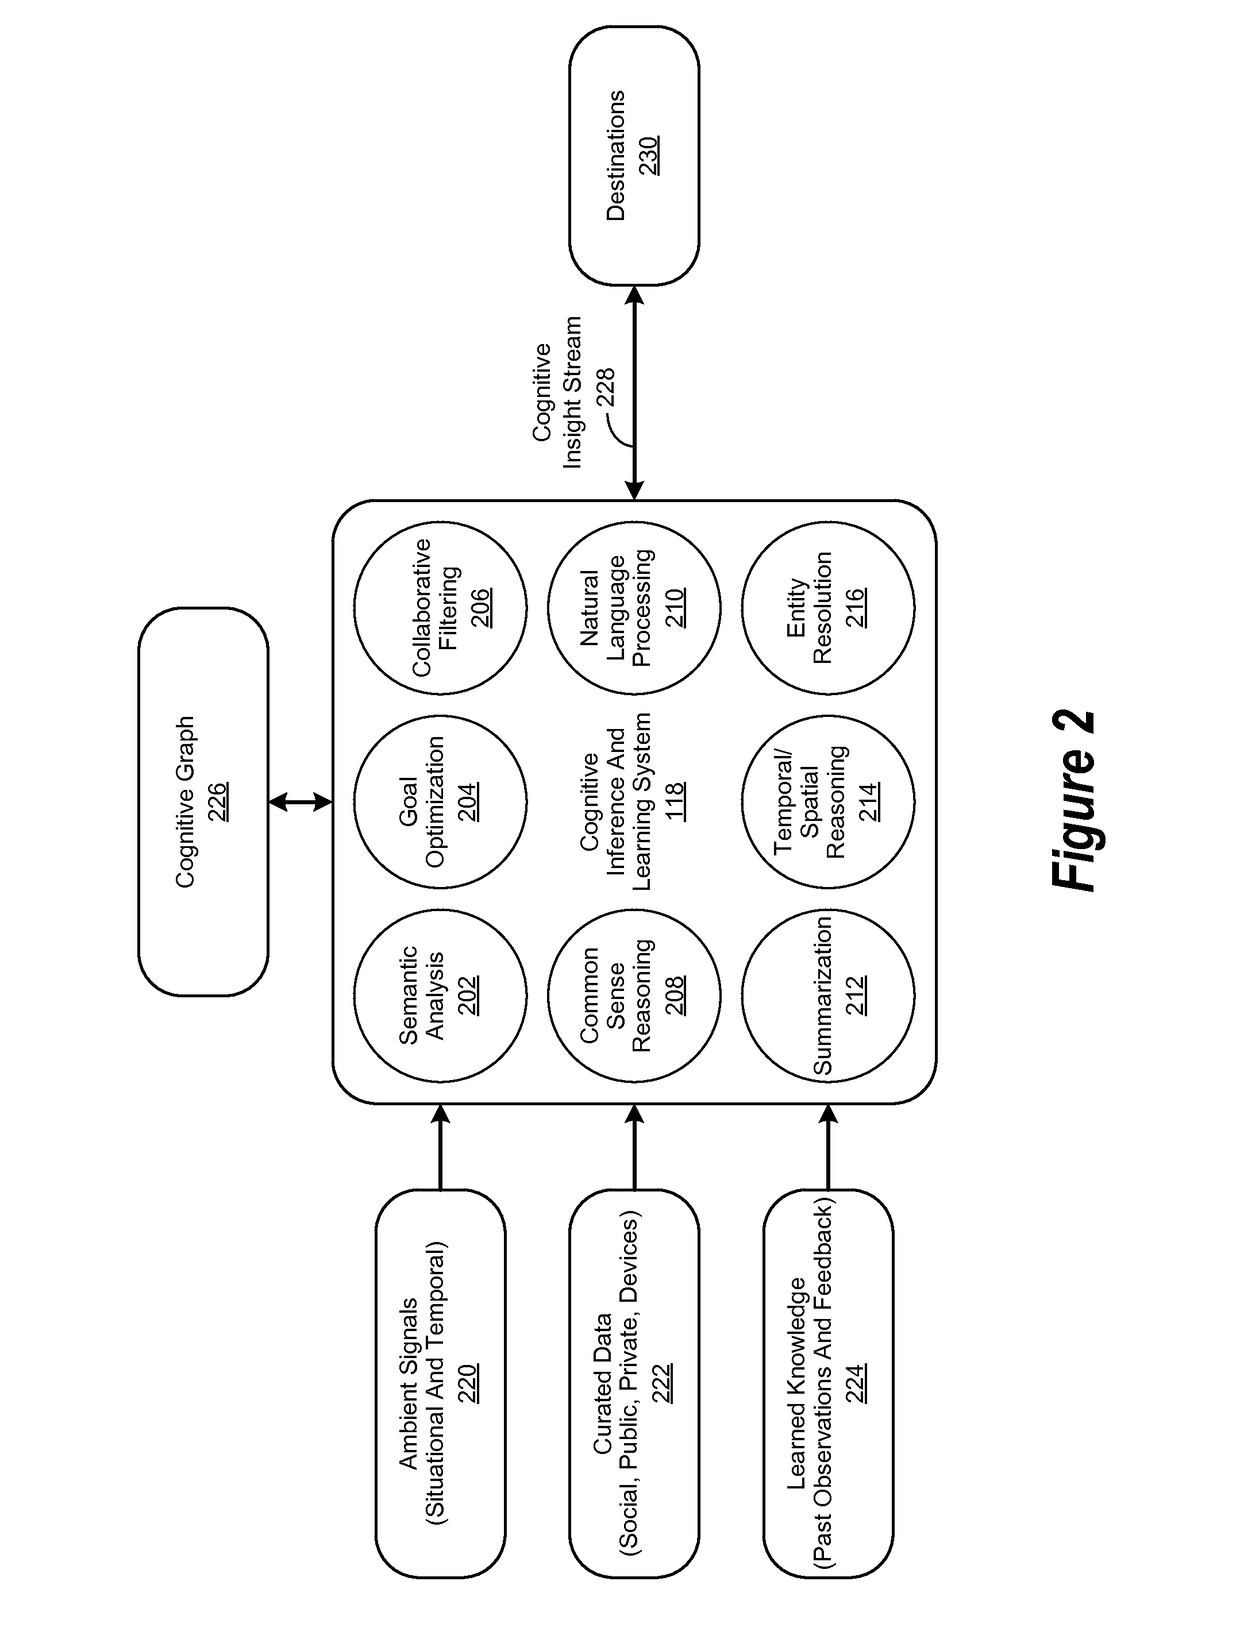 Method for Performing a Cognitive Learning Lifecycle Operation